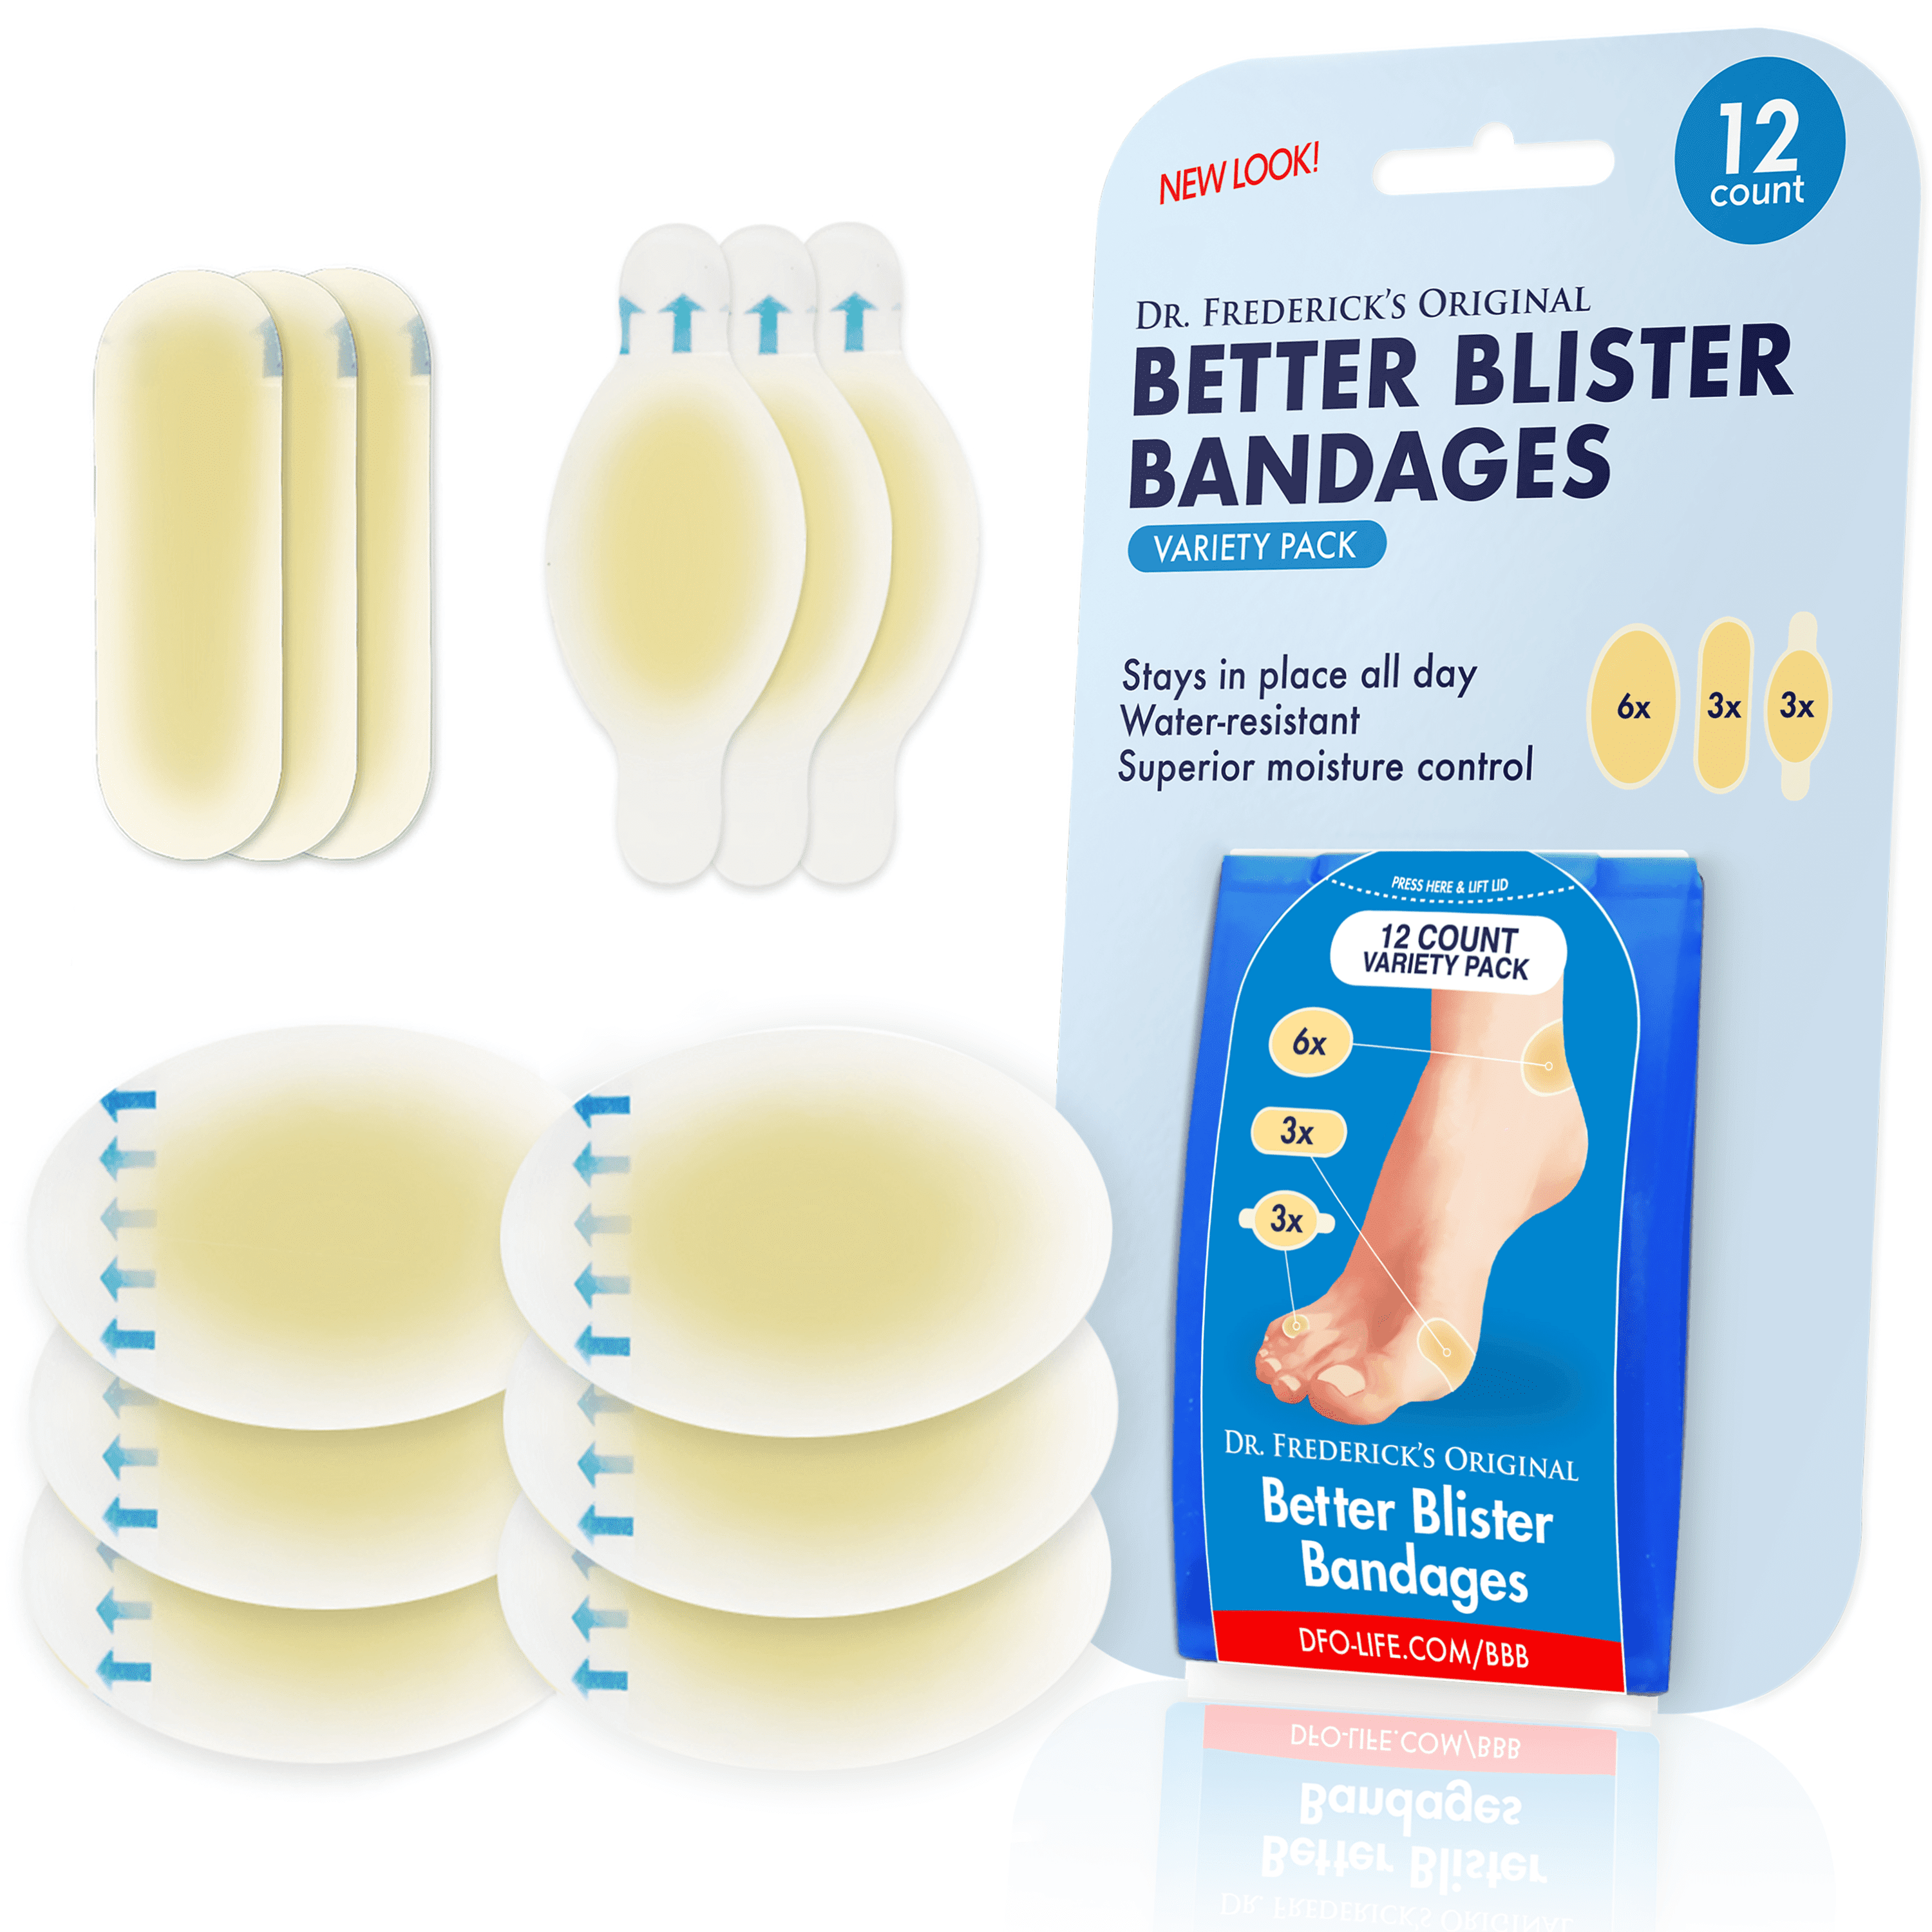 Blister Treatment Patch Protect Skin from Rubbing Shoes Blister Pads Blister Cushions for Fingers Forefoot ,New Material,Blister Gel Guard Heel Toes 18PCS Blister Prevention Waterproof 